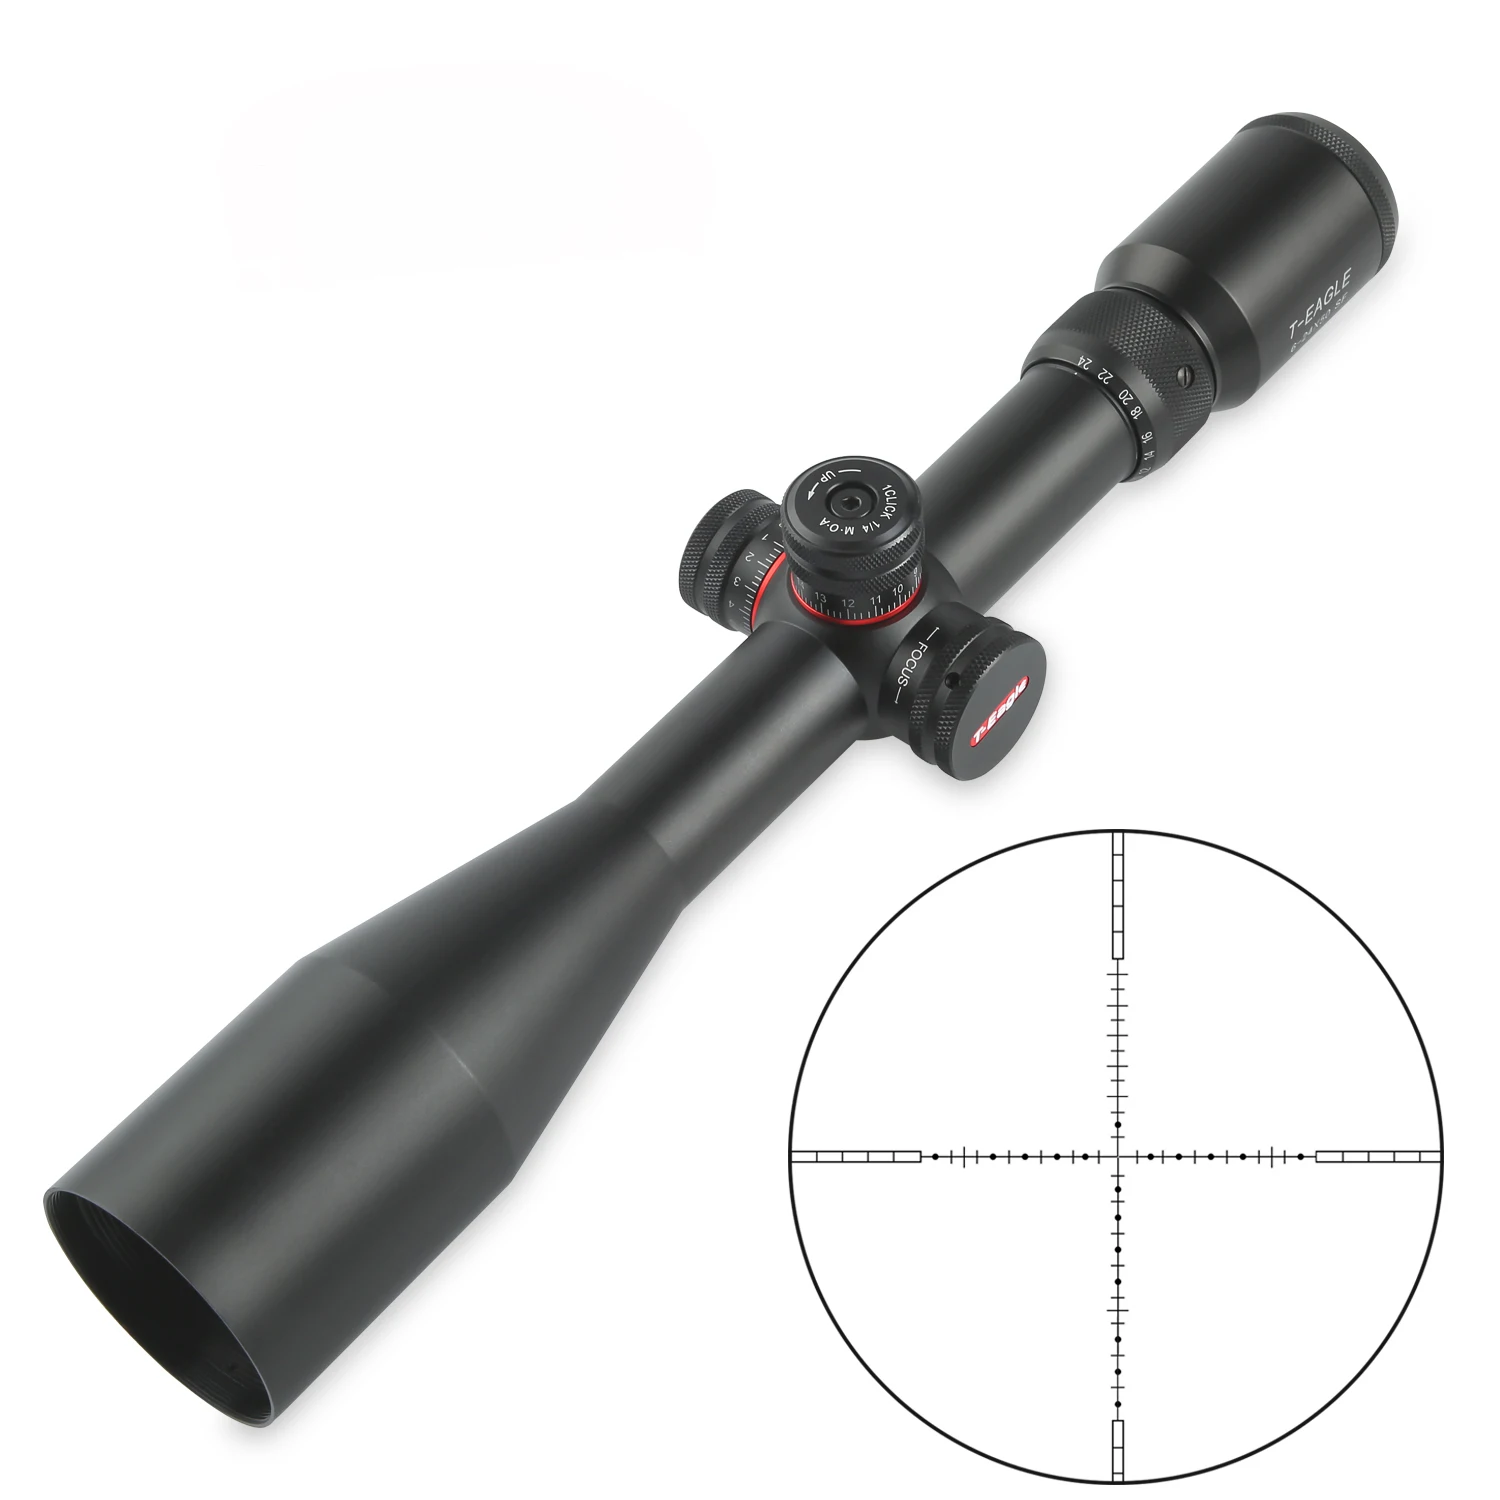 

T-EAGLE R 6-24x50 long range hunting riflescope tactical airgun scope scopes & accessories for airsoft